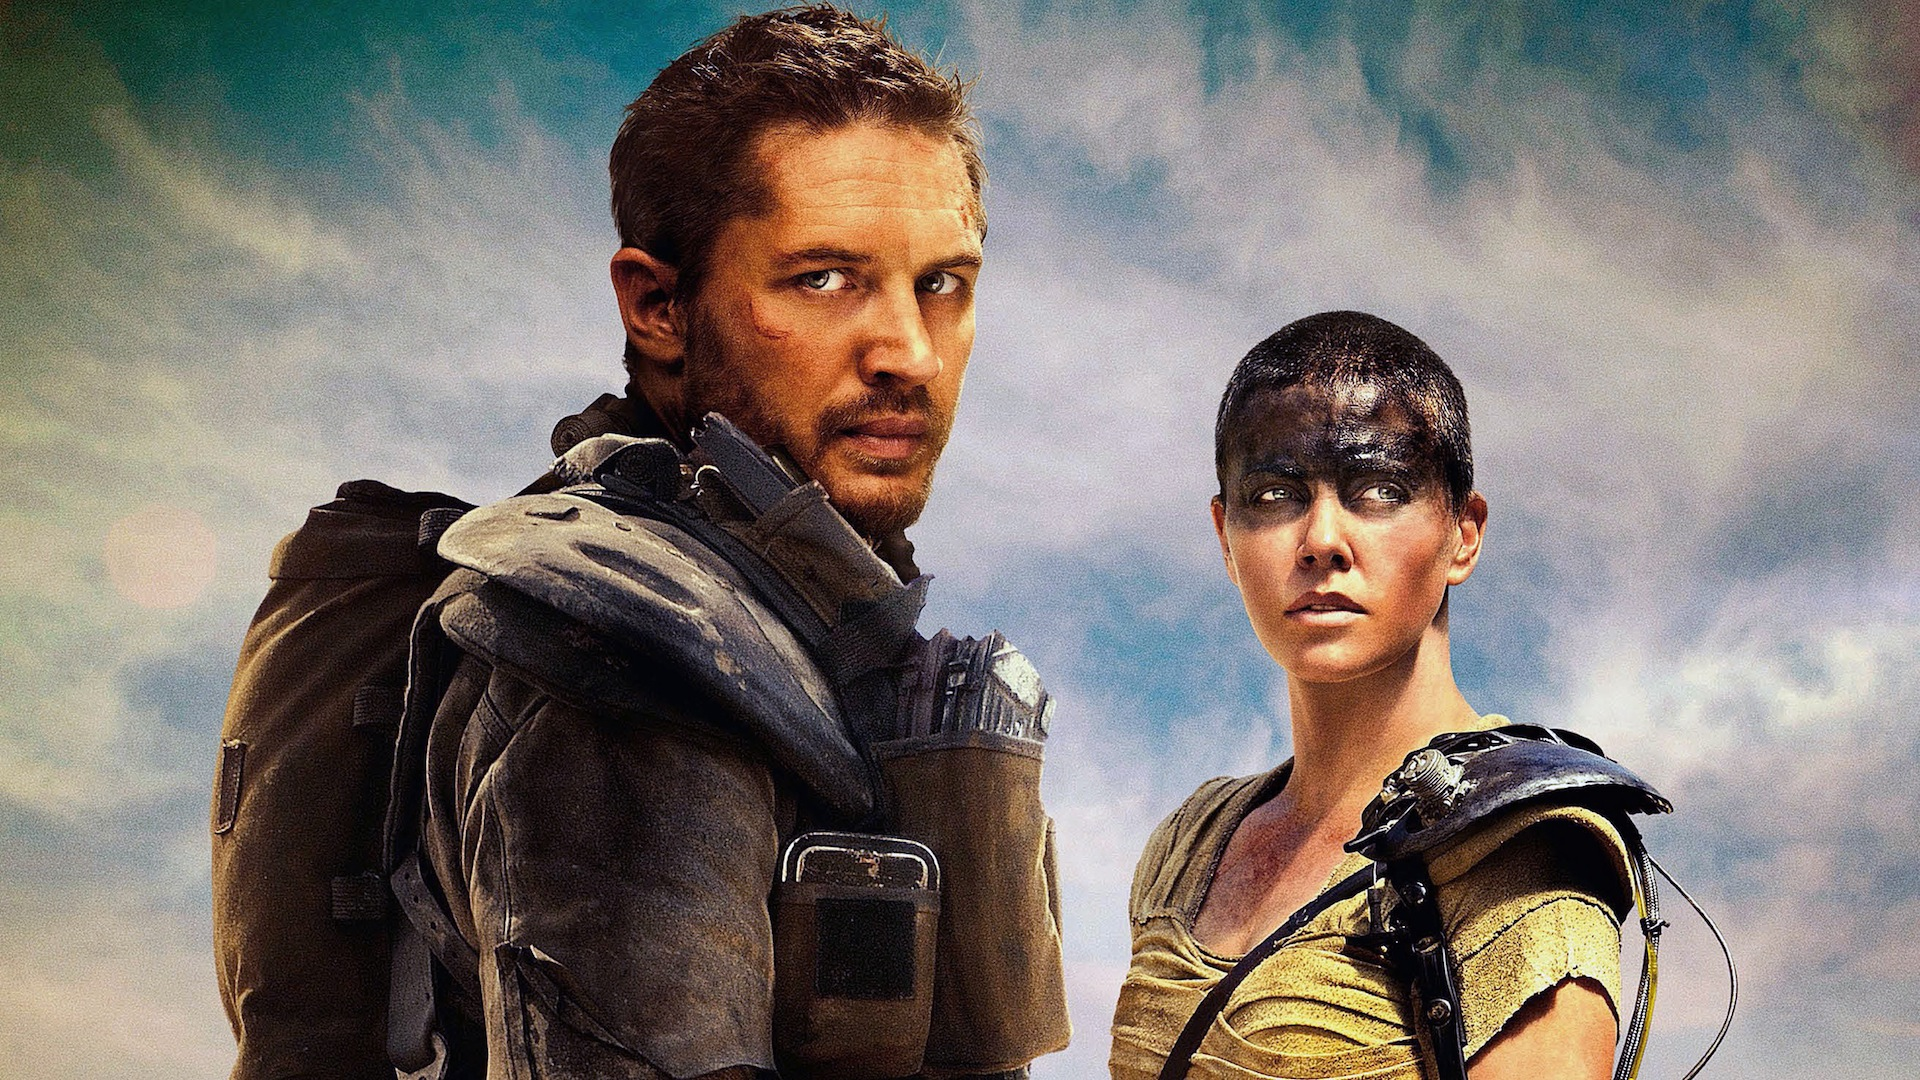 George Miller is ready to shoot new parts of Mad Max - Movies, George Miller, Crazy Max